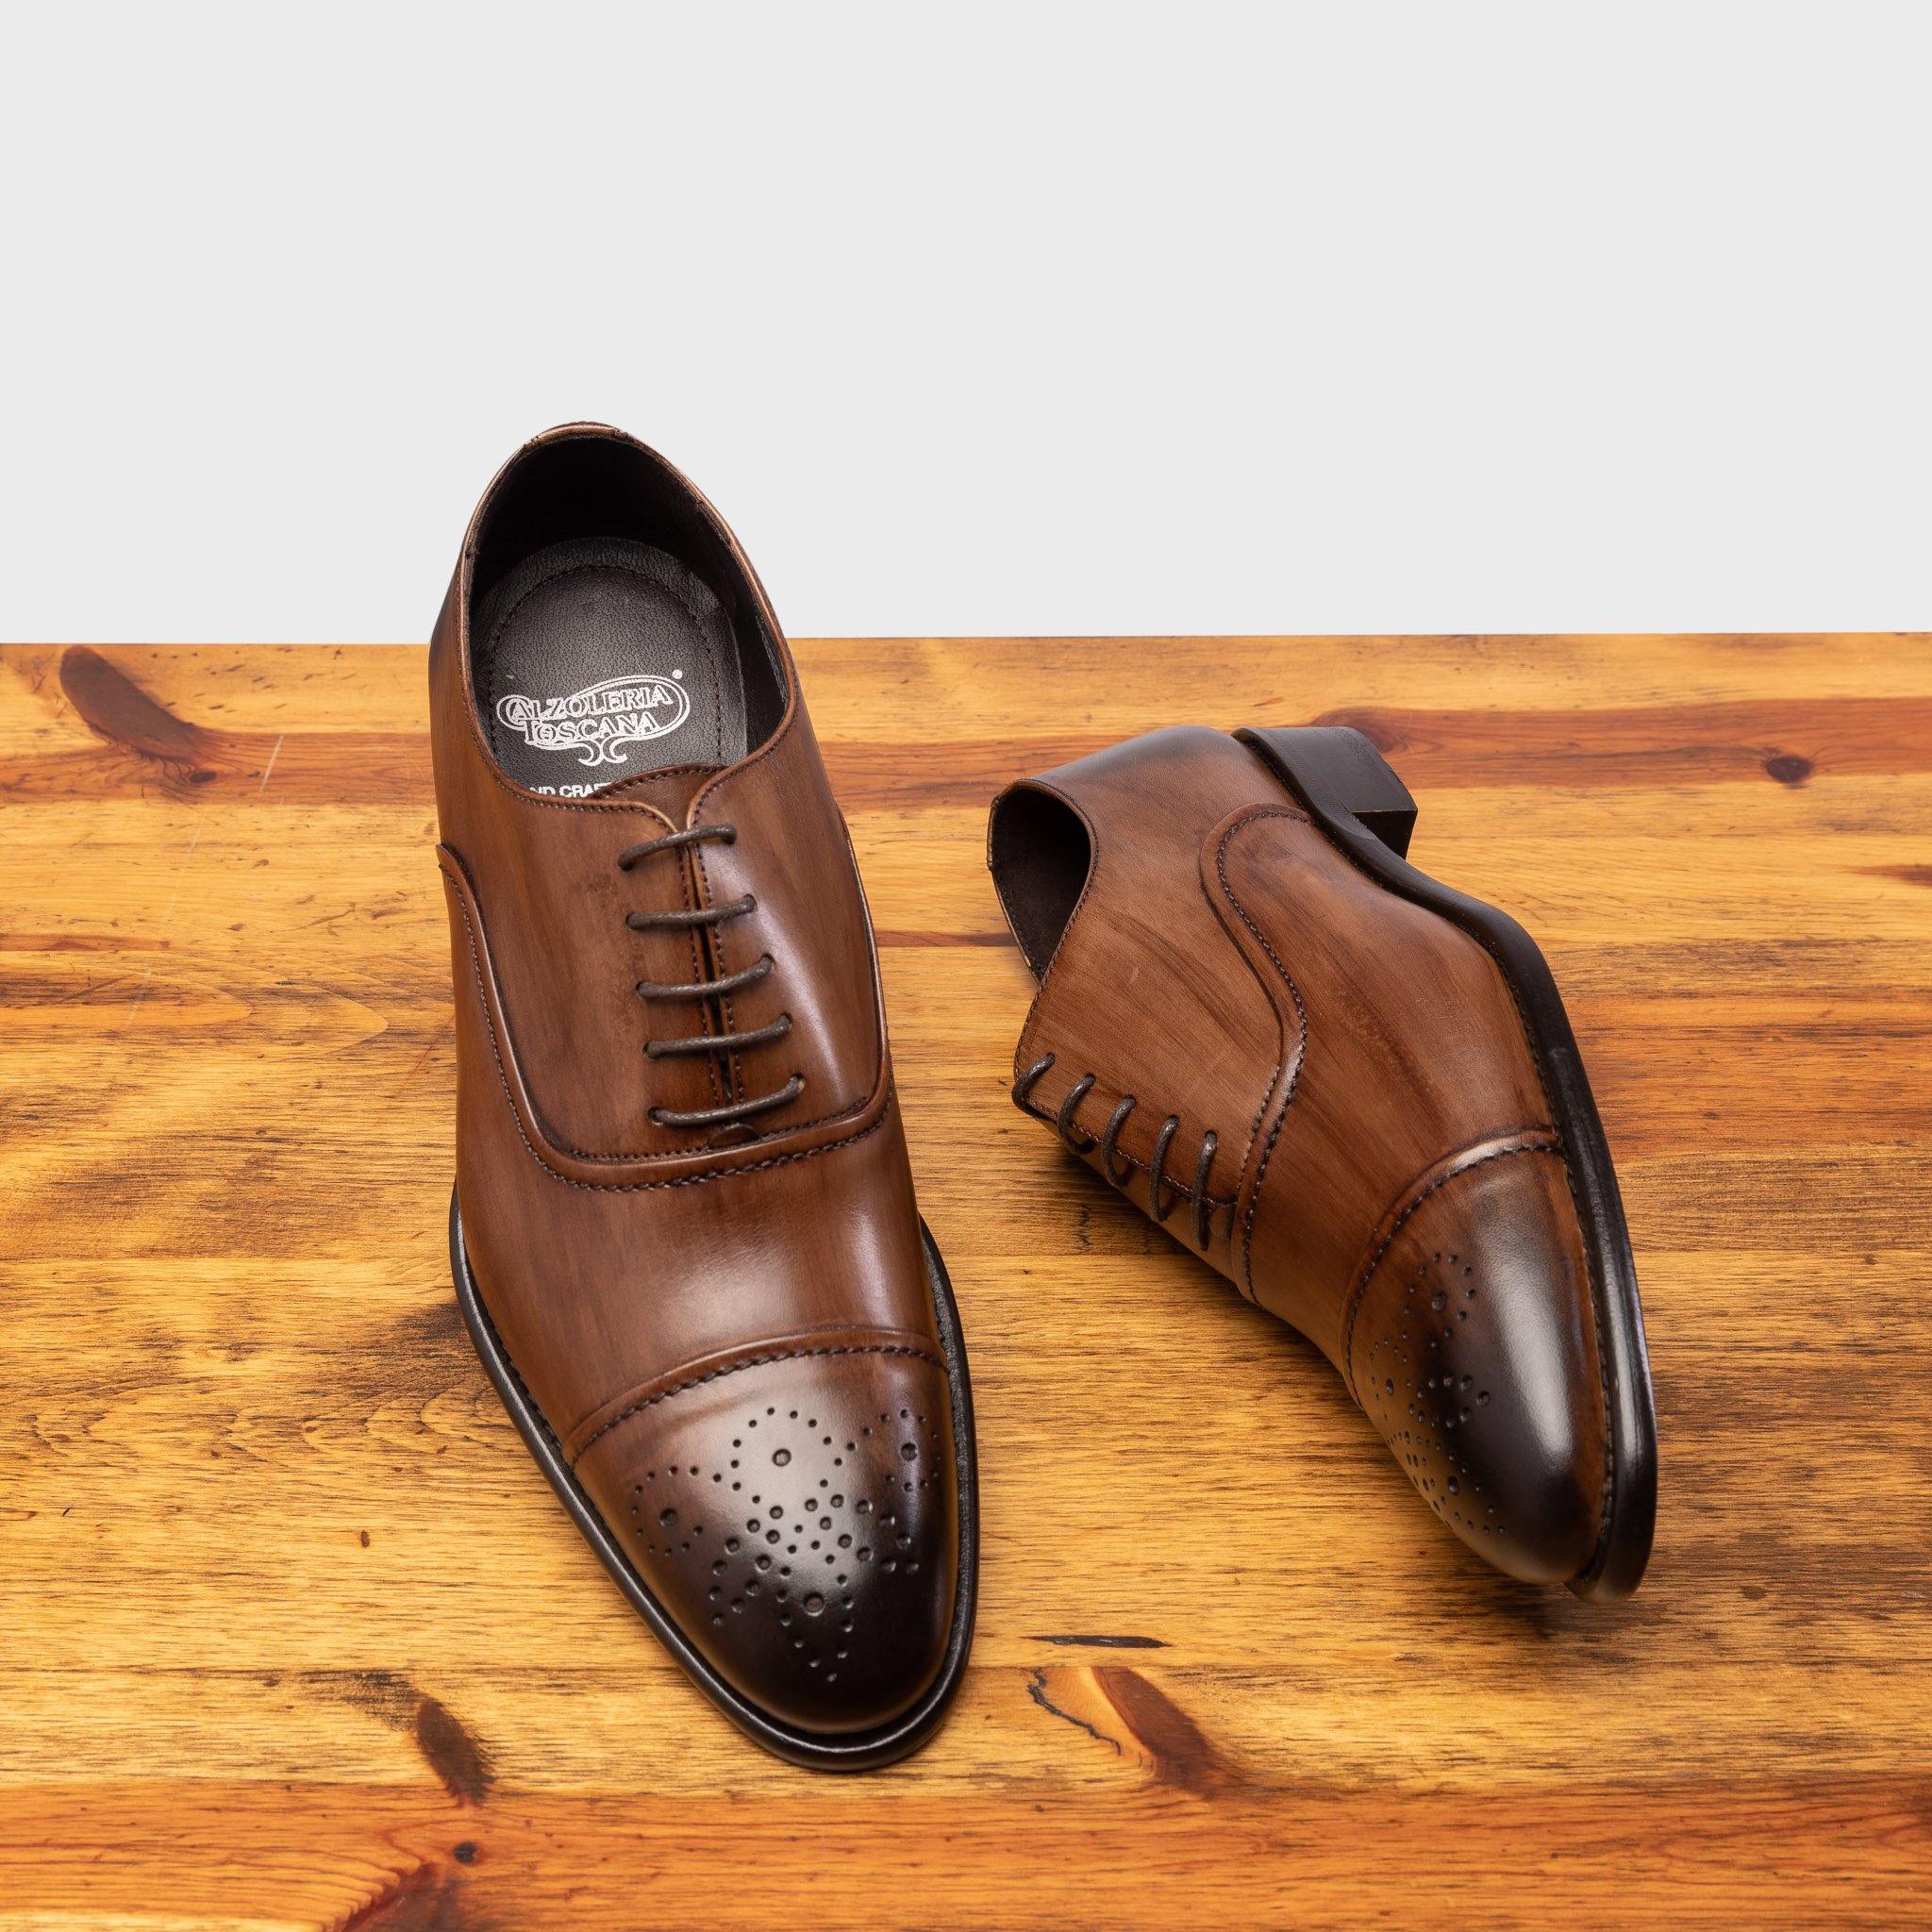 Picture showcasing the 2361 Calzoleria Toscana Brown  Cayenne Calf Cap-Toe pair with the brand name insole on top of a wooden table